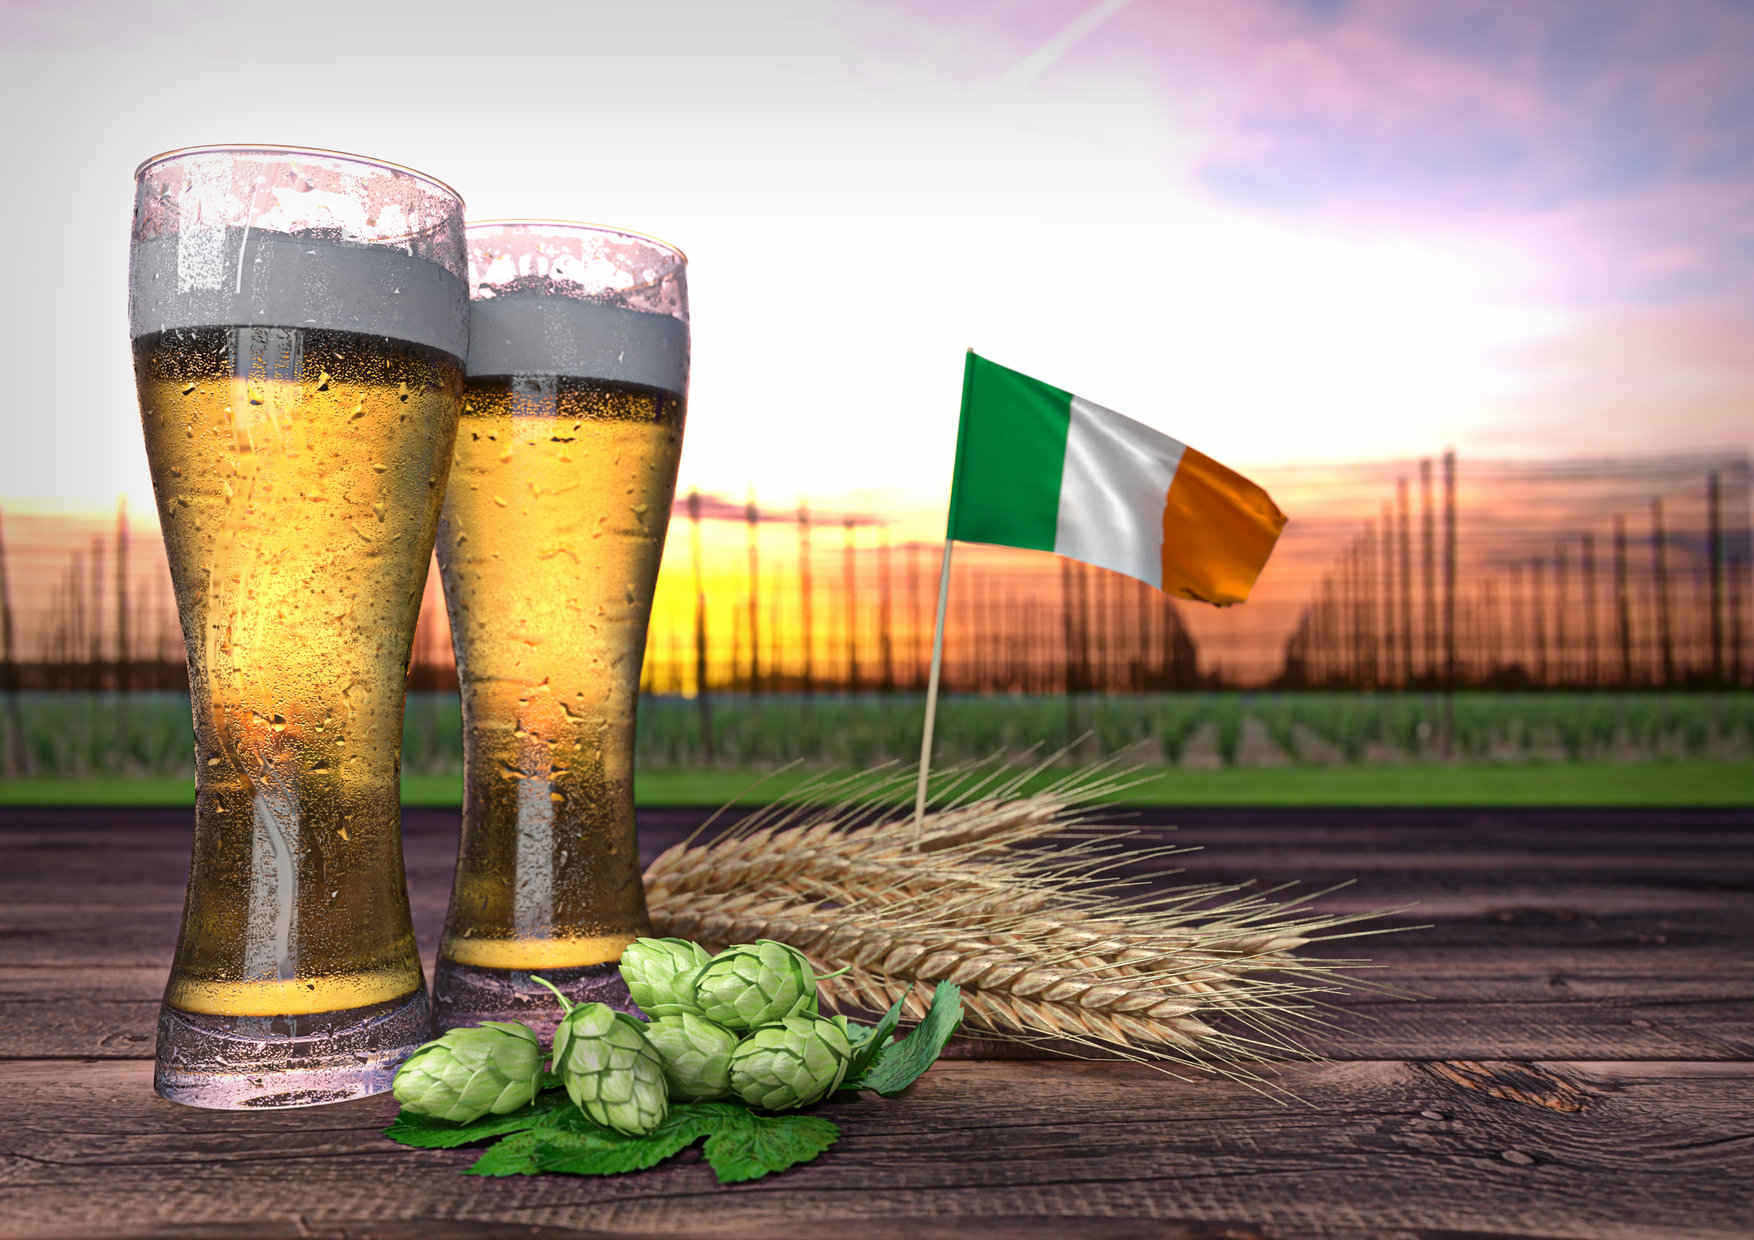 Despite a 2% per capita fall in beer consumption it remains Ireland’s favourite alcohol beverage, accounting for just under 45% of all alcohol consumed in 2017.